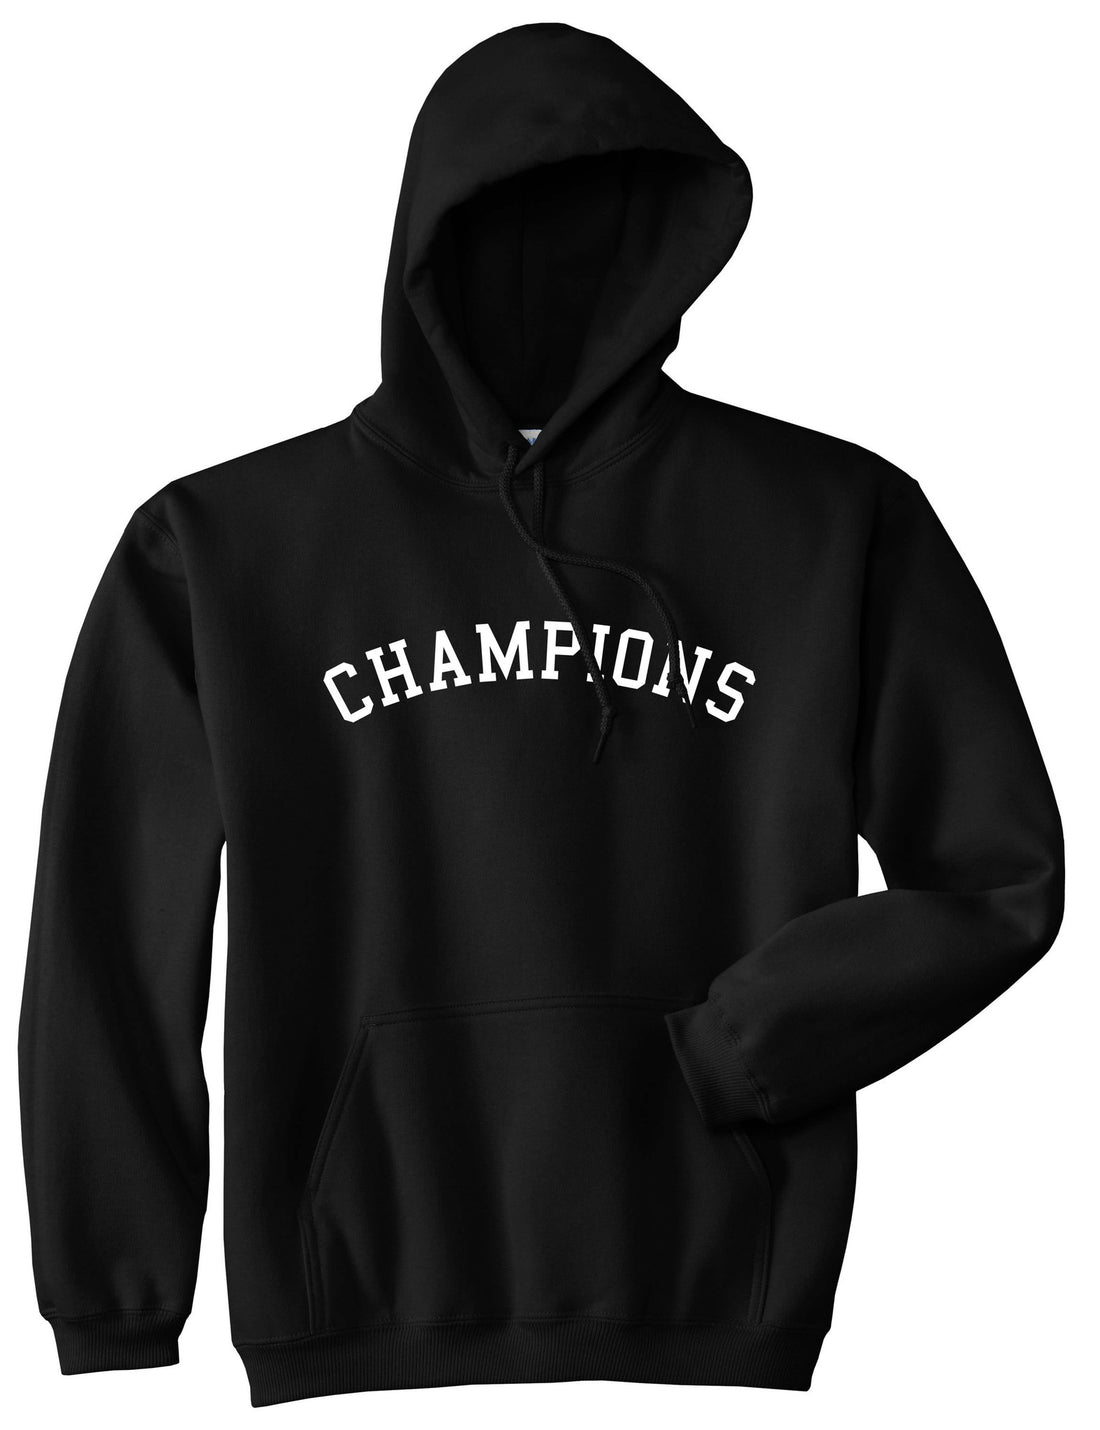 Champions Pullover Hoodie Hoody in Black by Kings Of NY